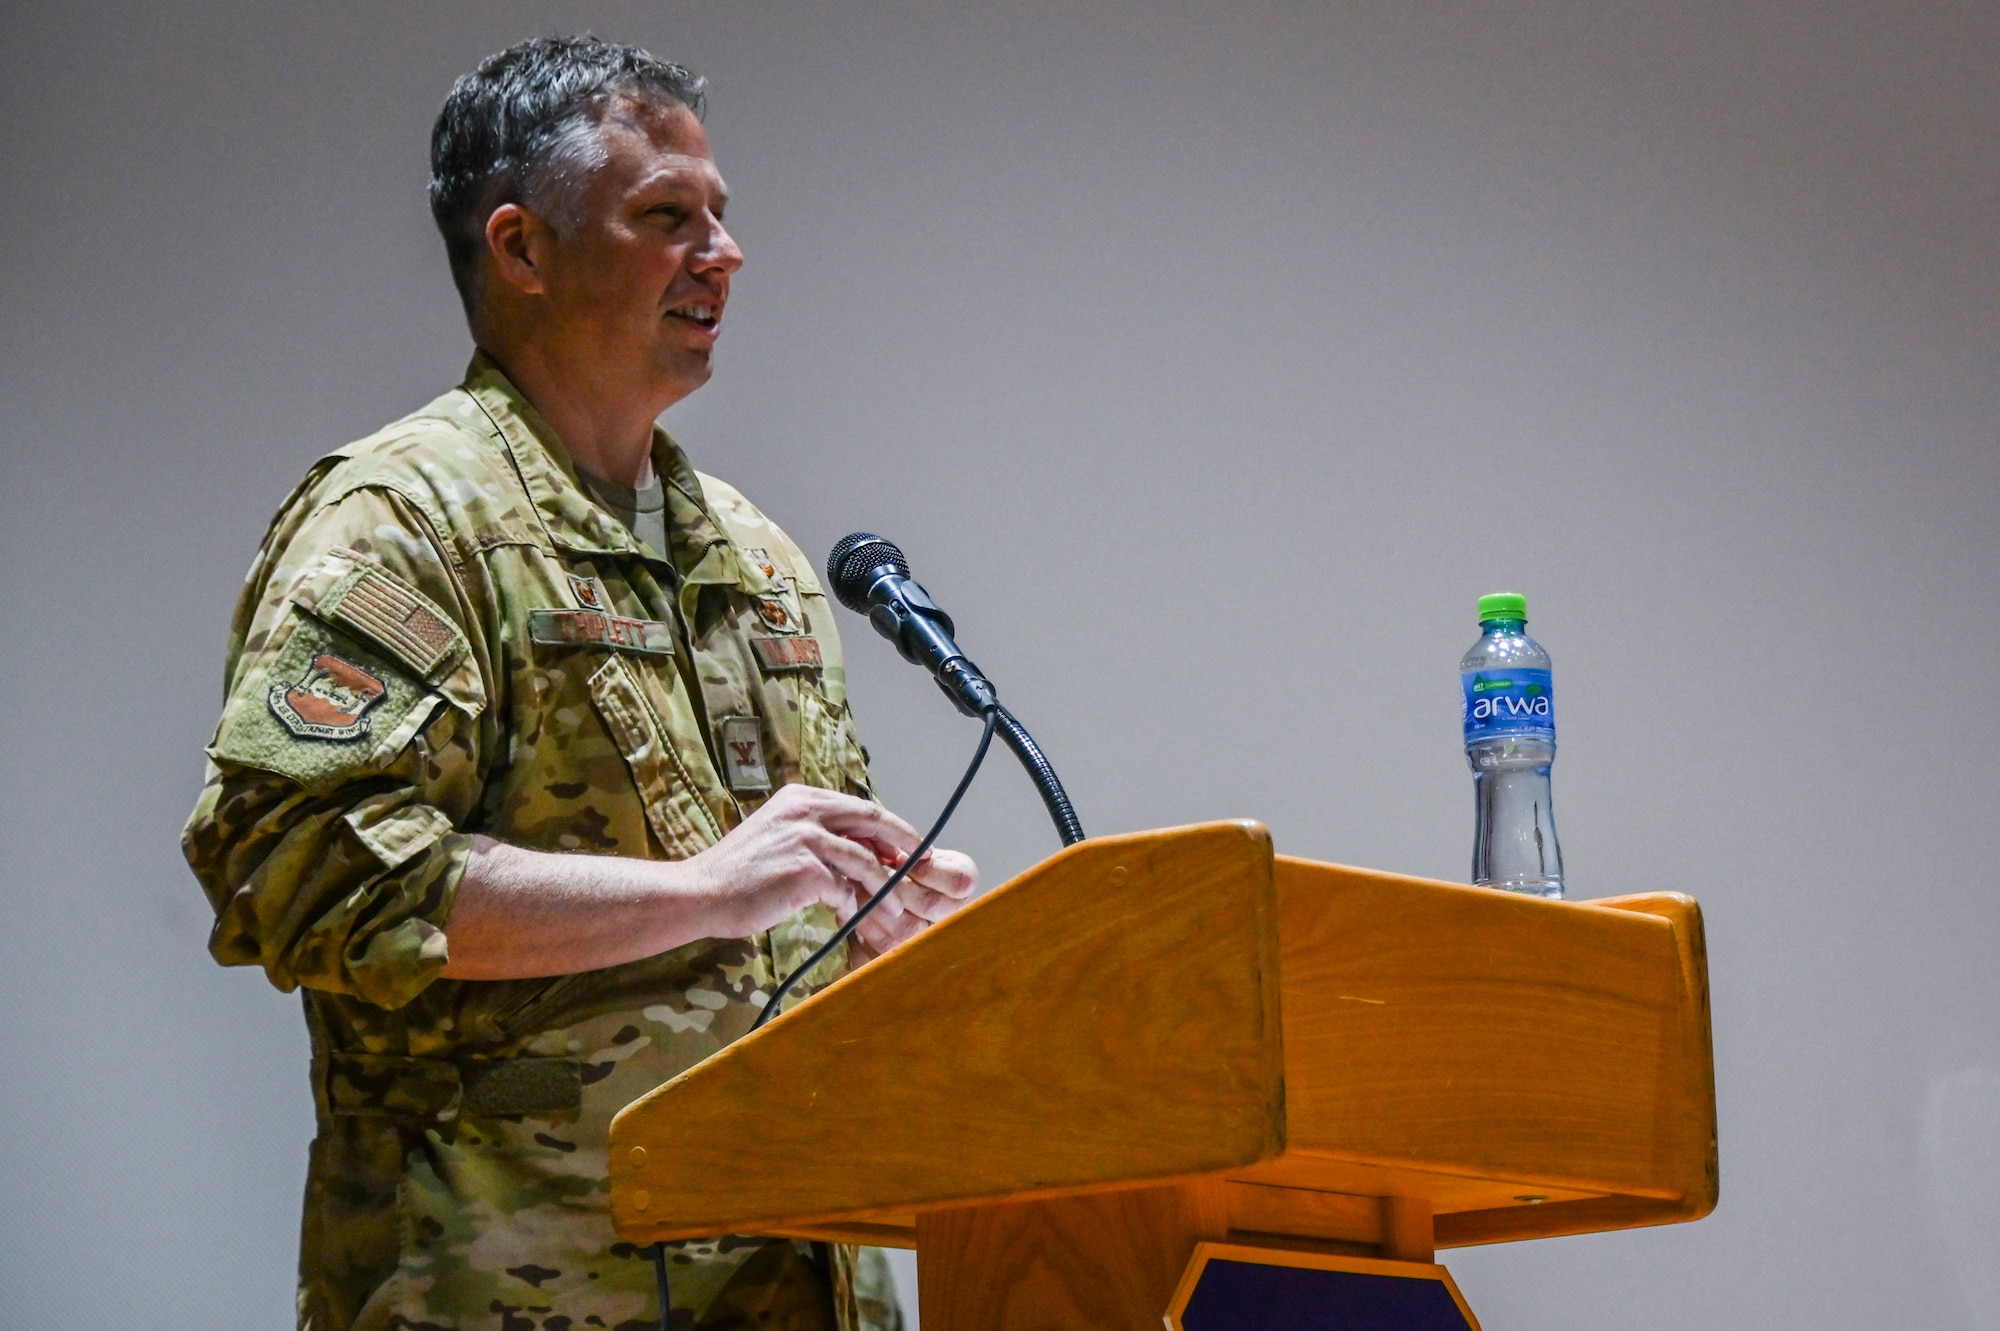 A photo of a commander speaking at a ceremony